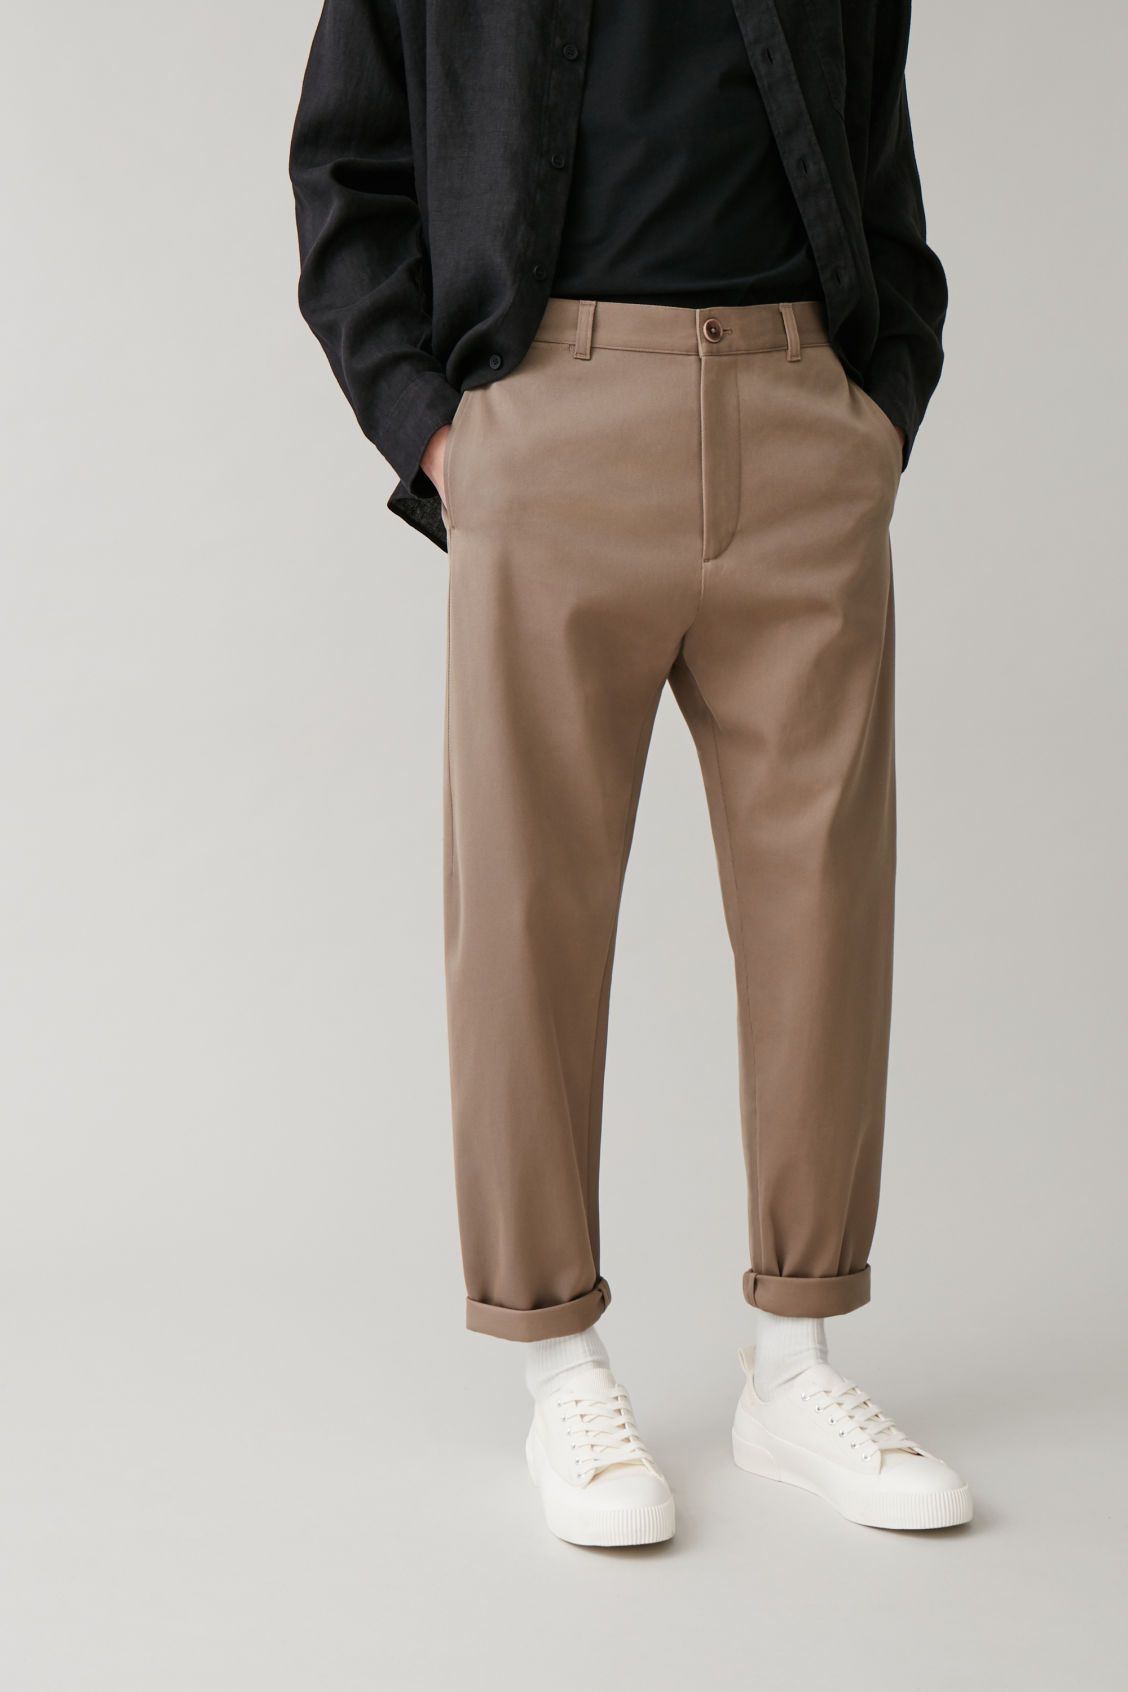 Casual and attractive dress pants for men